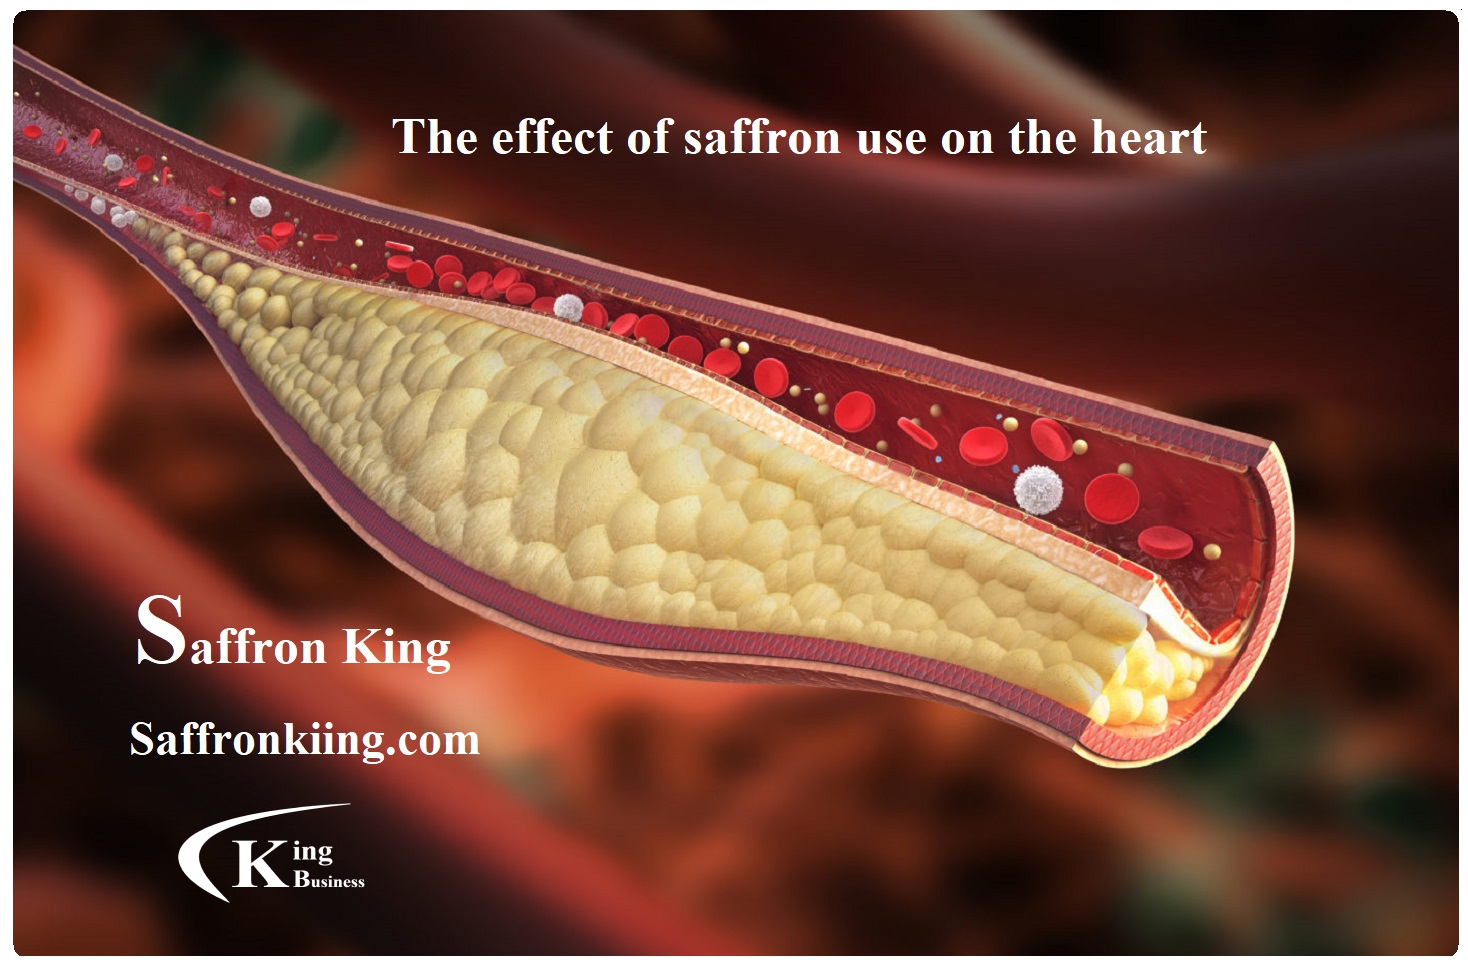 The effect of saffron use on the heart